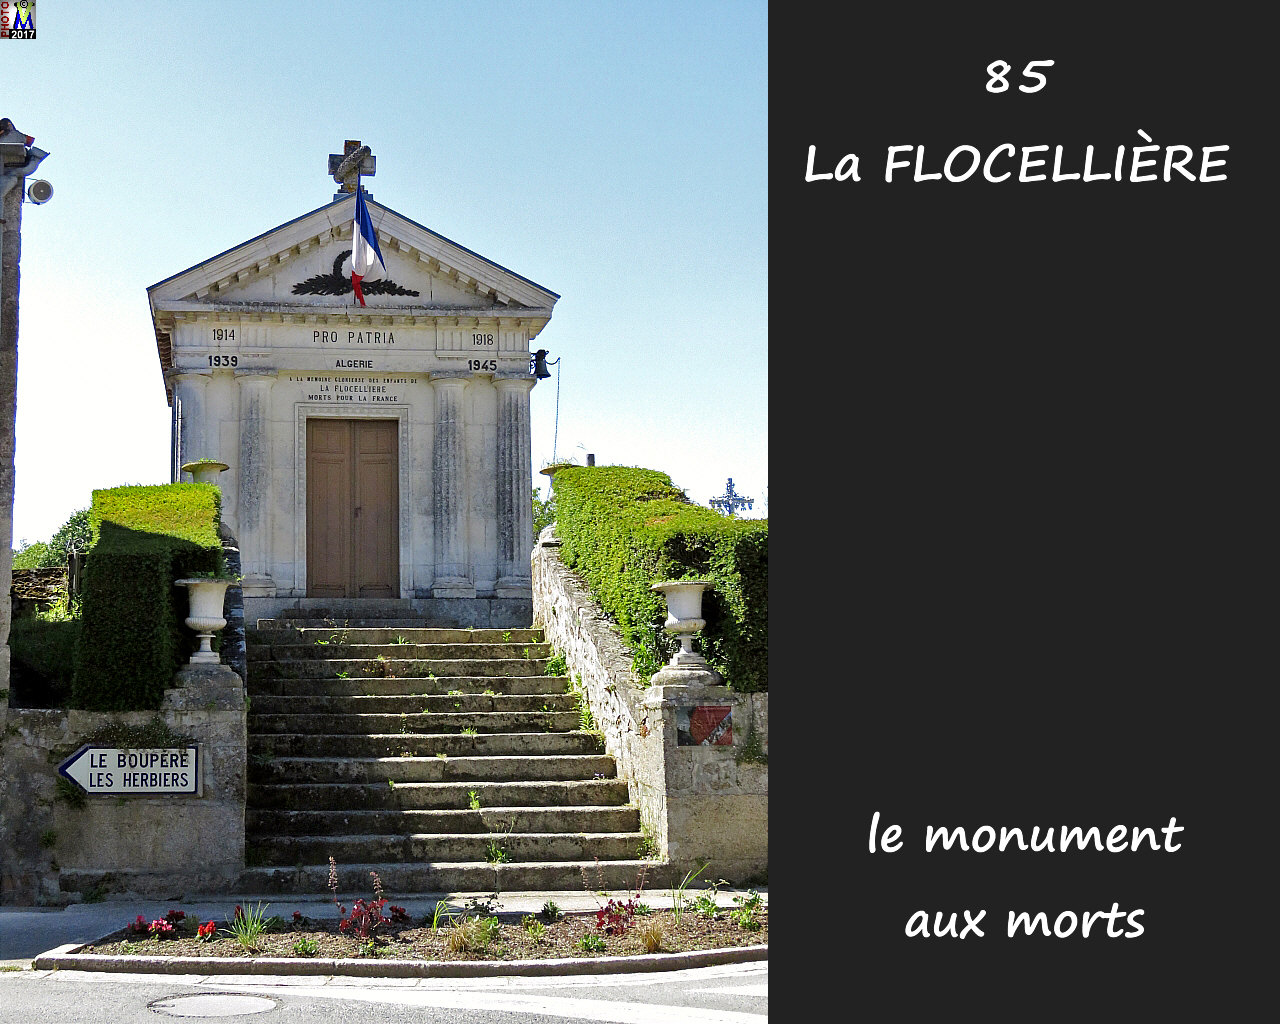 85FLOCELLIERE_morts_1000.jpg